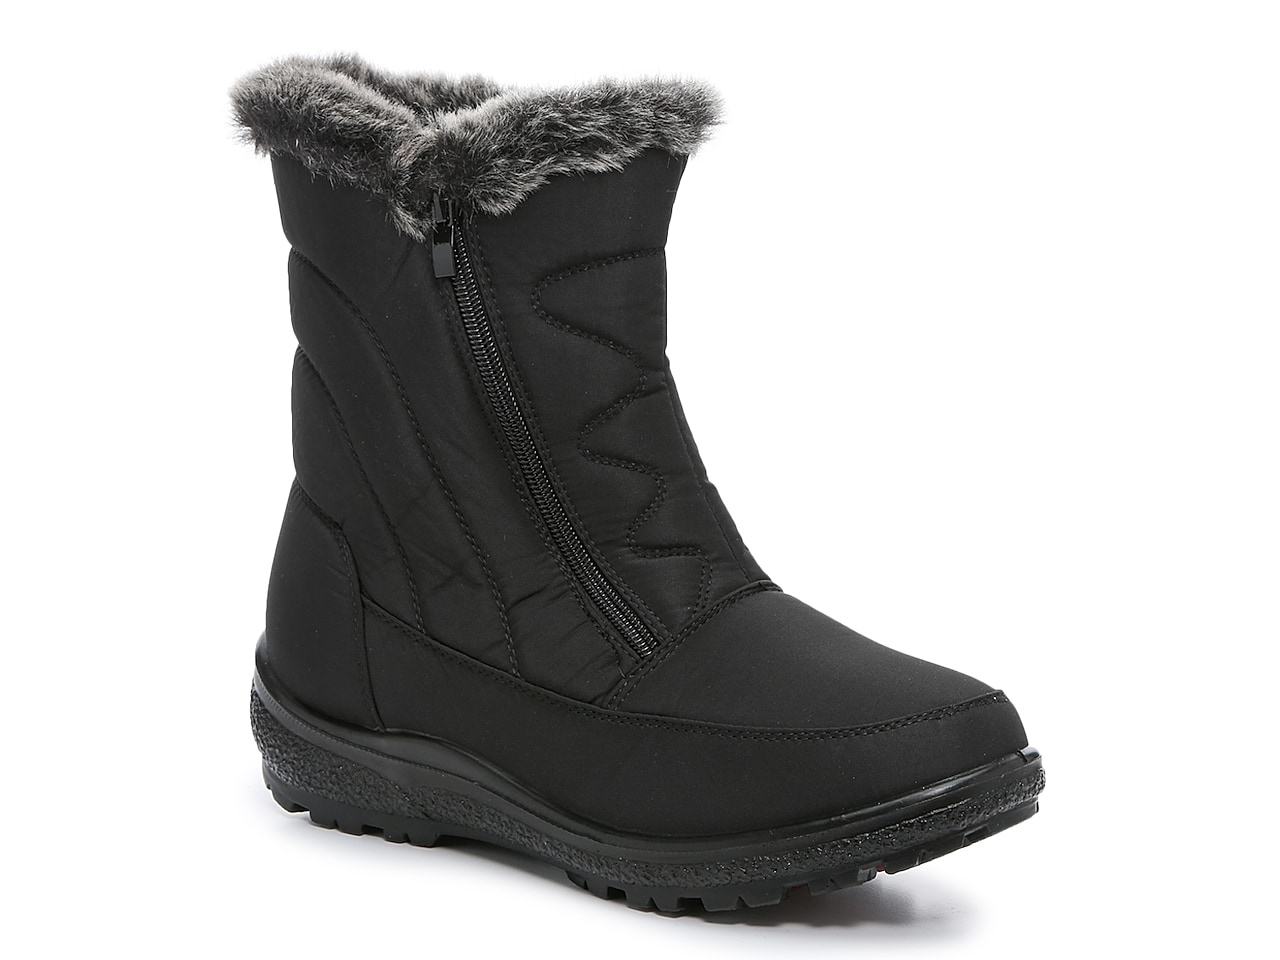 Flexus by Spring Step Persenia Snow Boot Women's Shoes | DSW